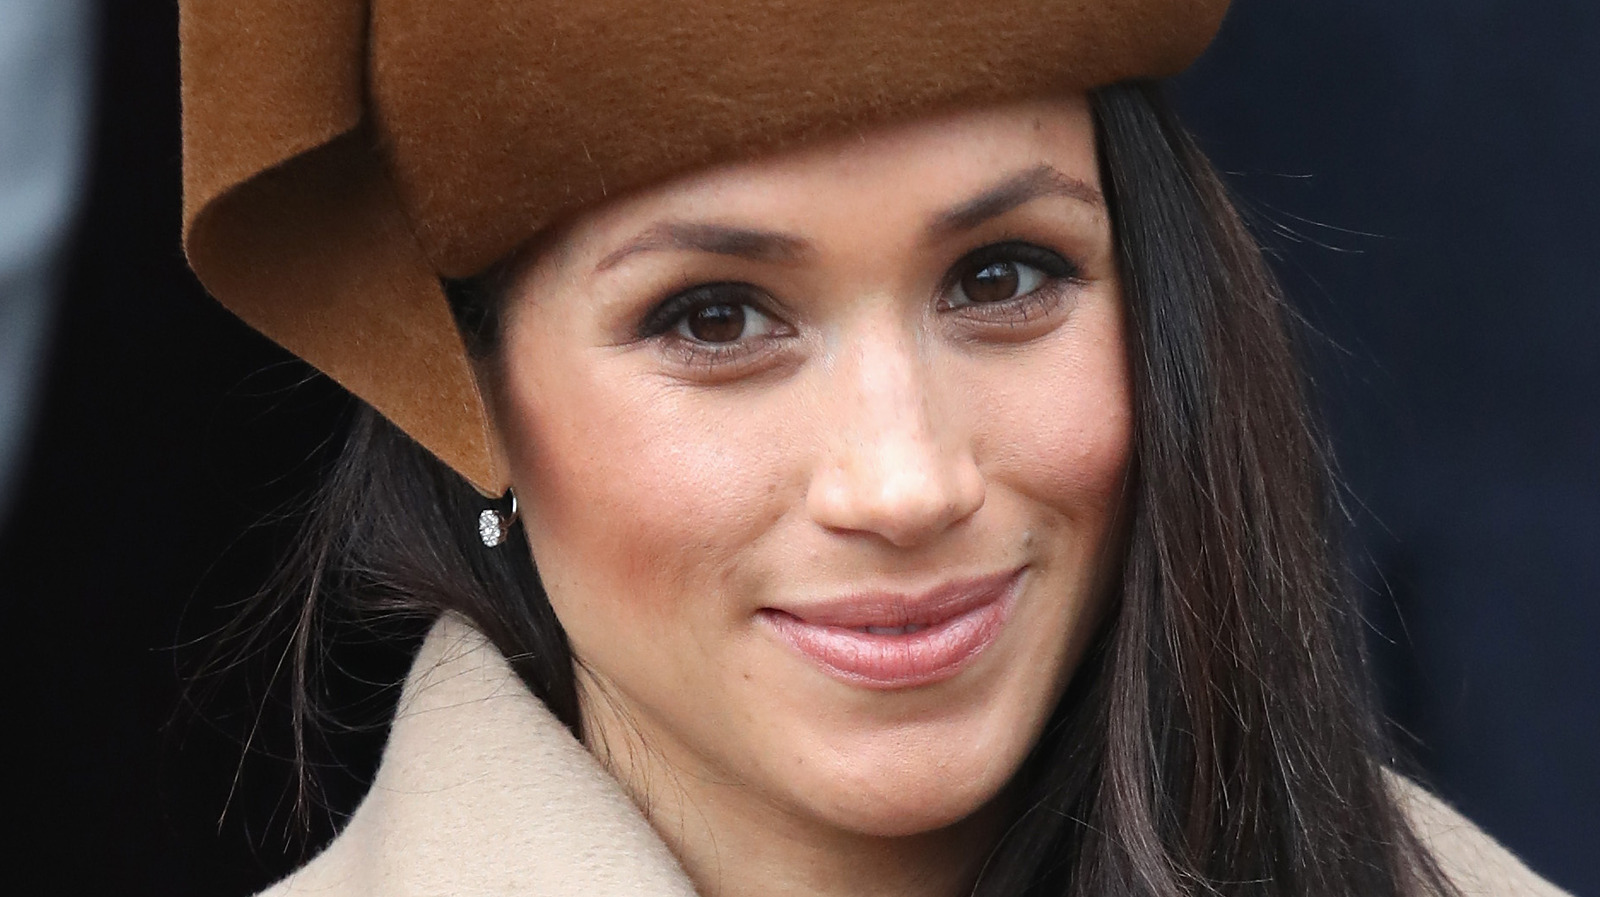 Meghan Markle's $4,900 Dior handbag, which pays tribute to Princess Diana,  sells out